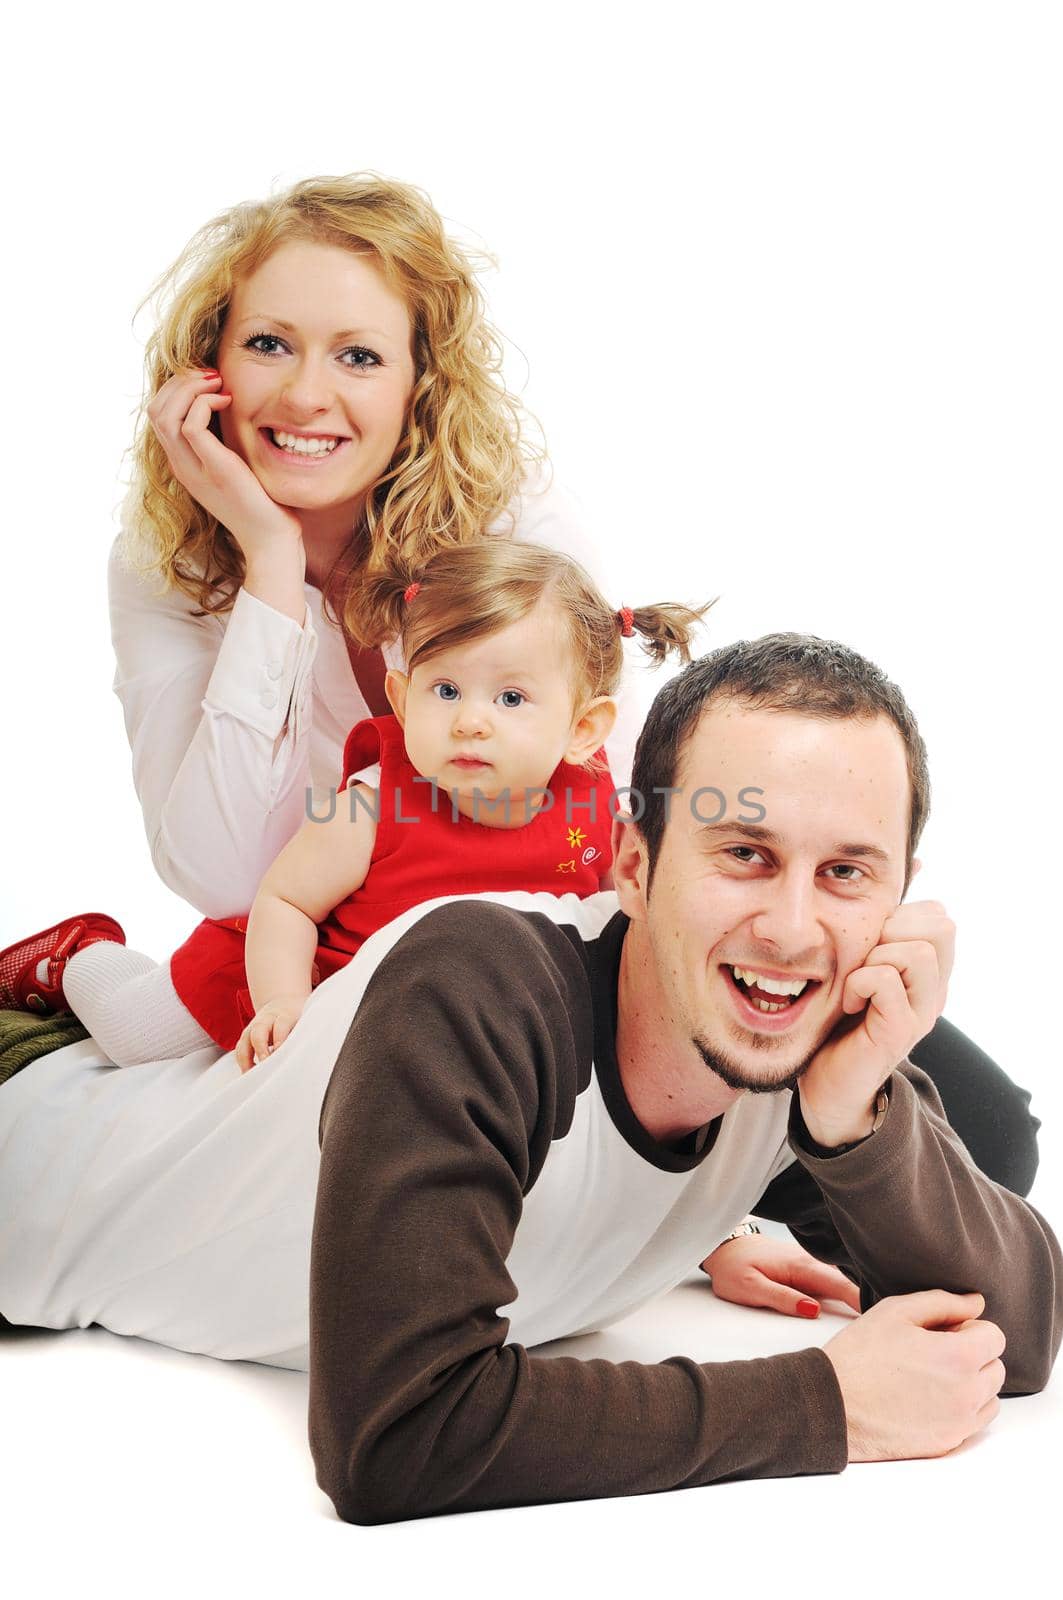 young happy family with beautiful baby playing and smile  isolated on white in studio